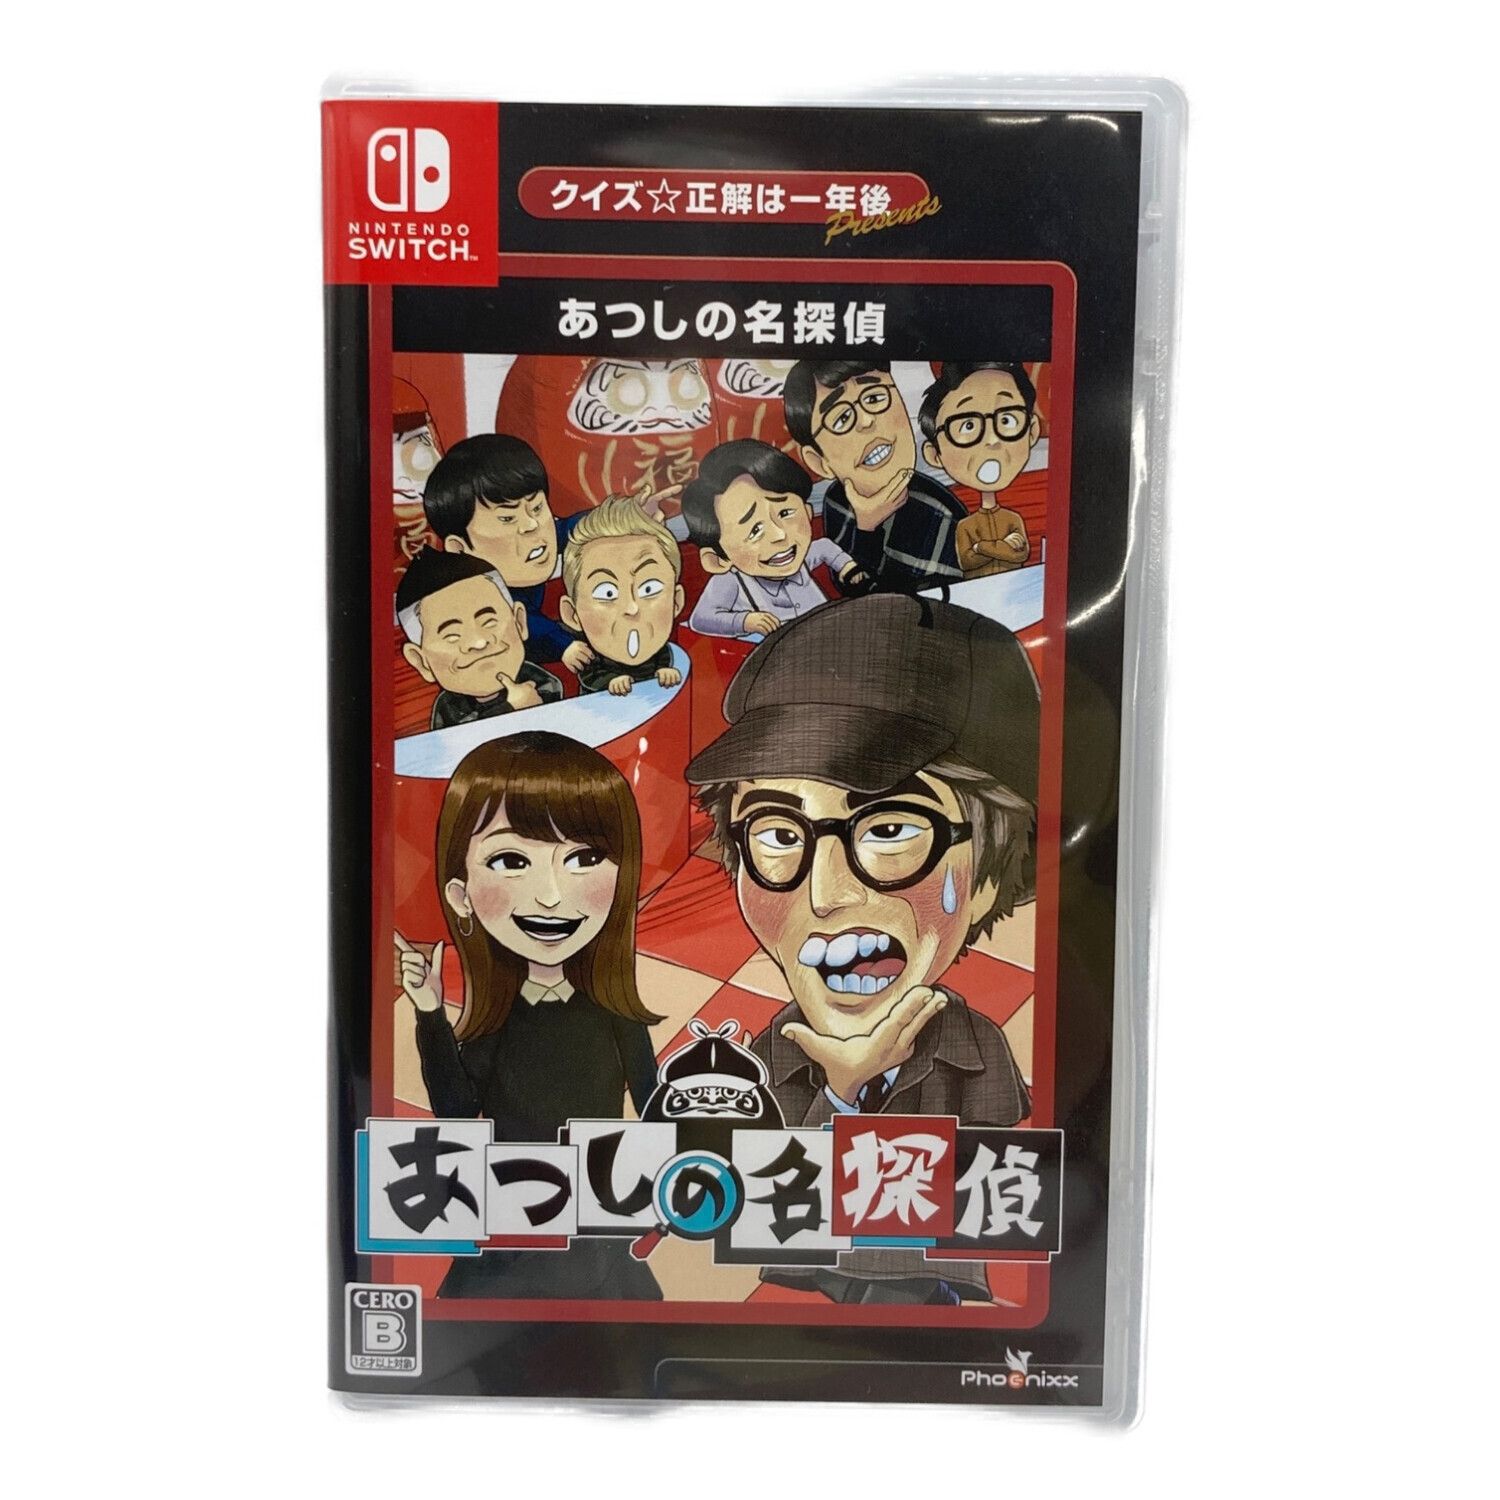 Nintendo Switch用ソフト クイズ正解は一年後 presents あつしの名探偵 